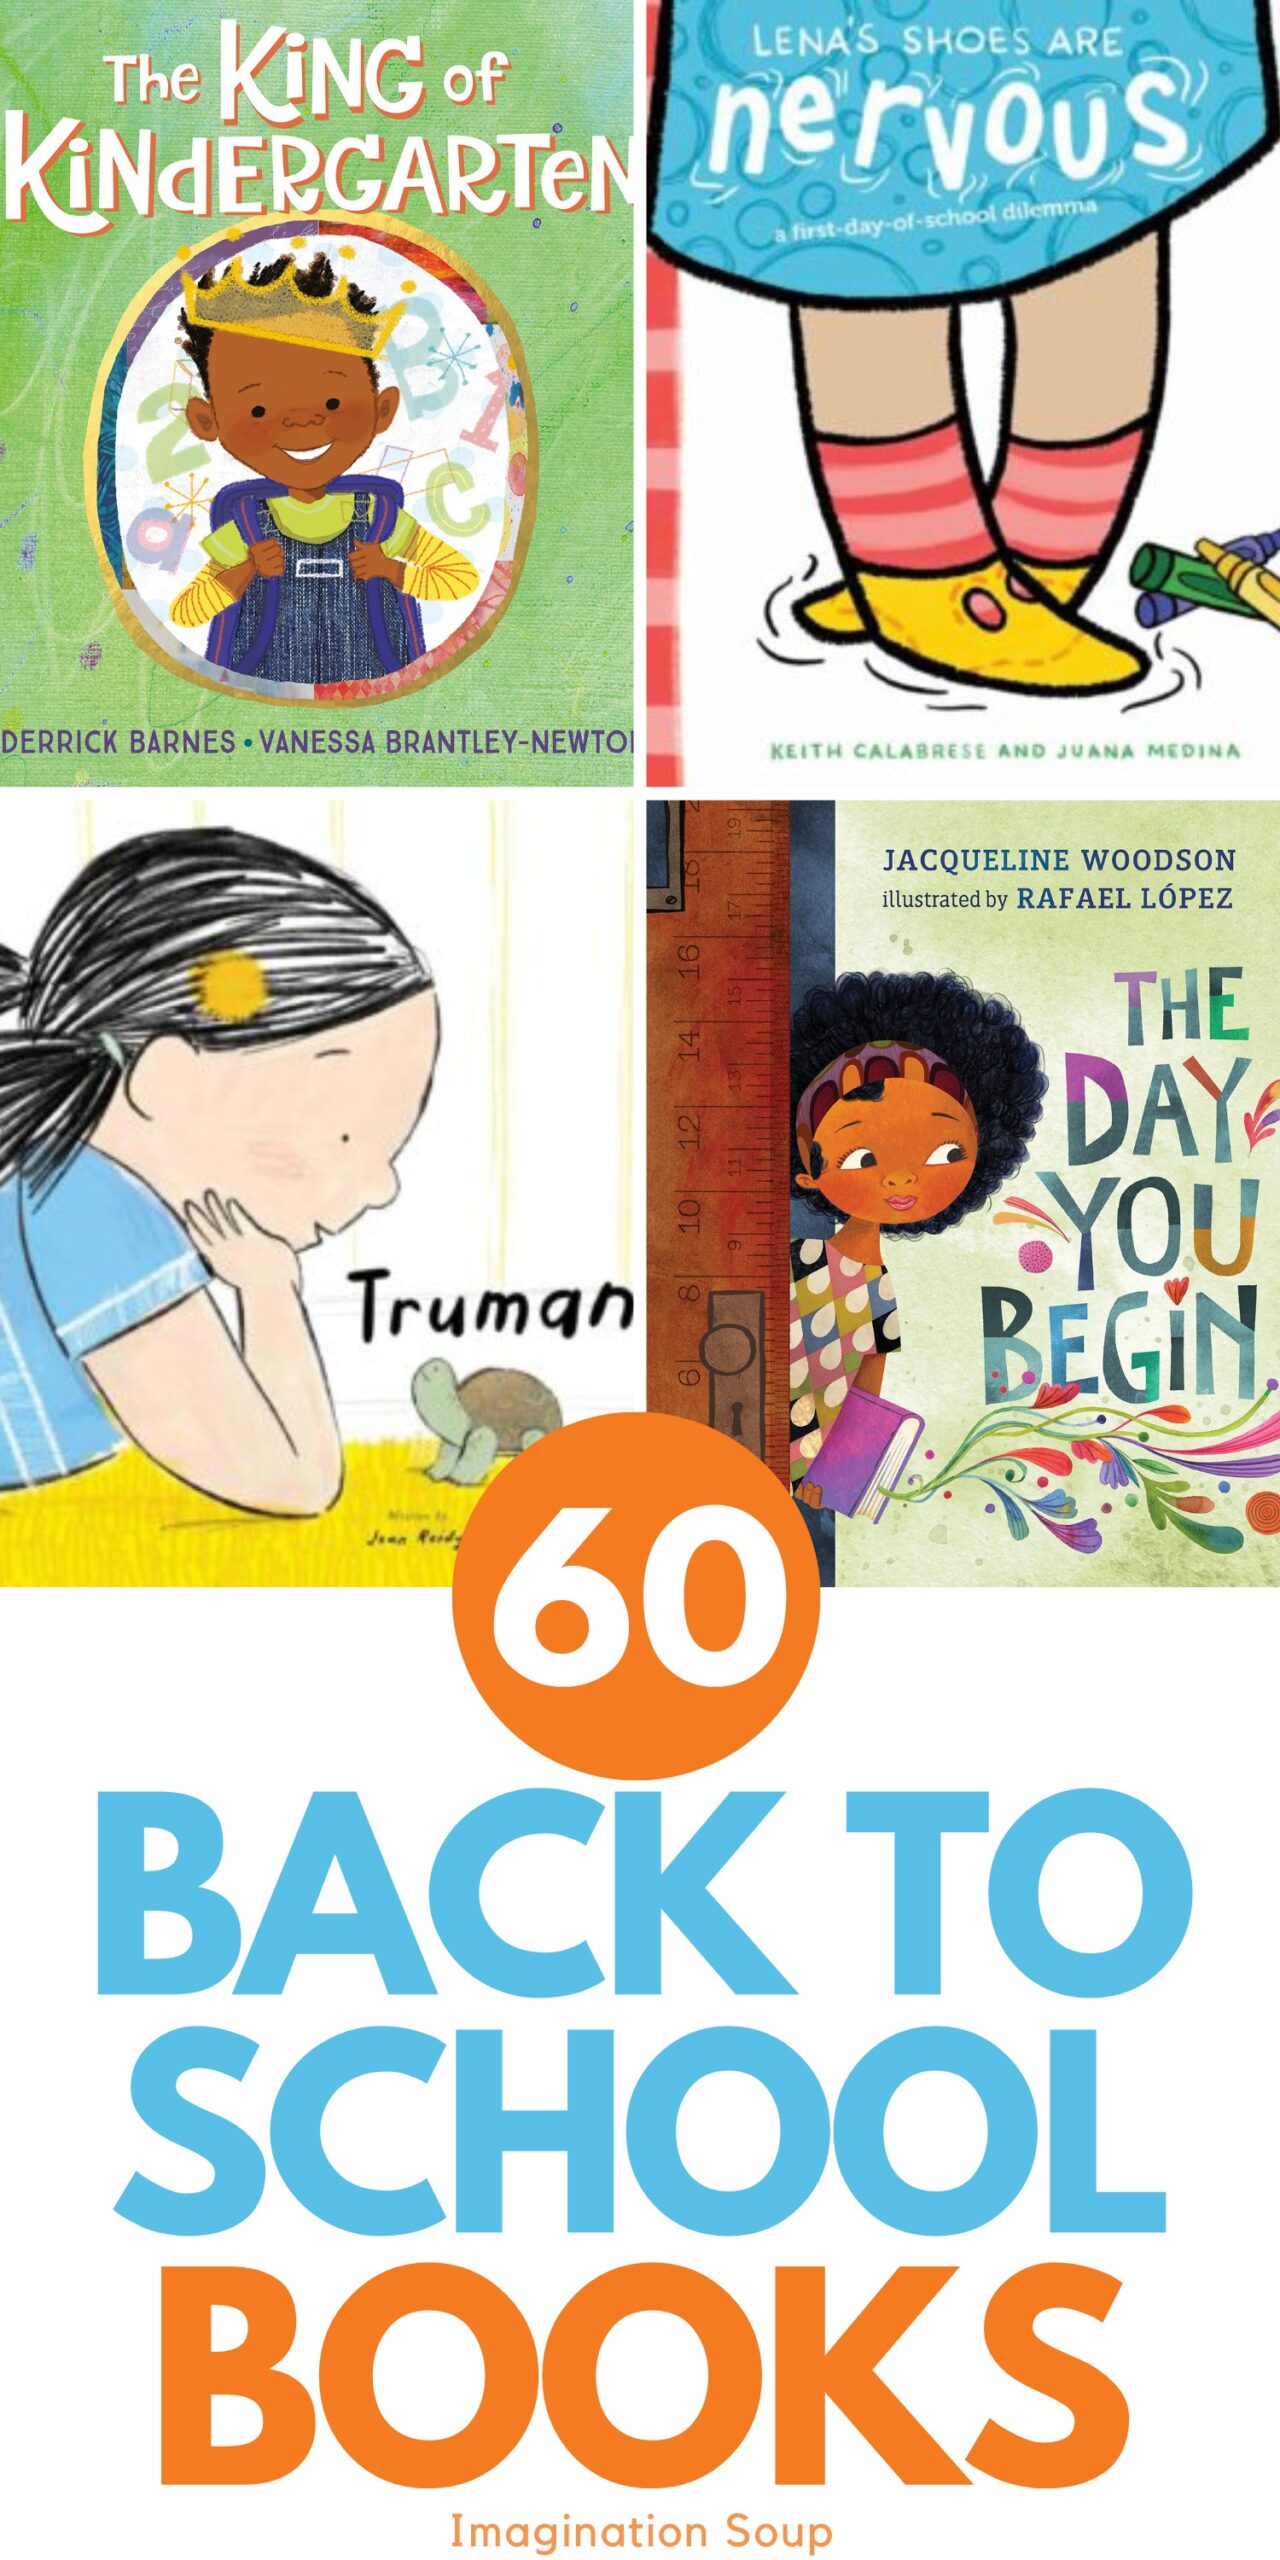 As your children go back to school, read these essential school-themed picture books about the first day, separation anxiety, making friends, and being yourself.